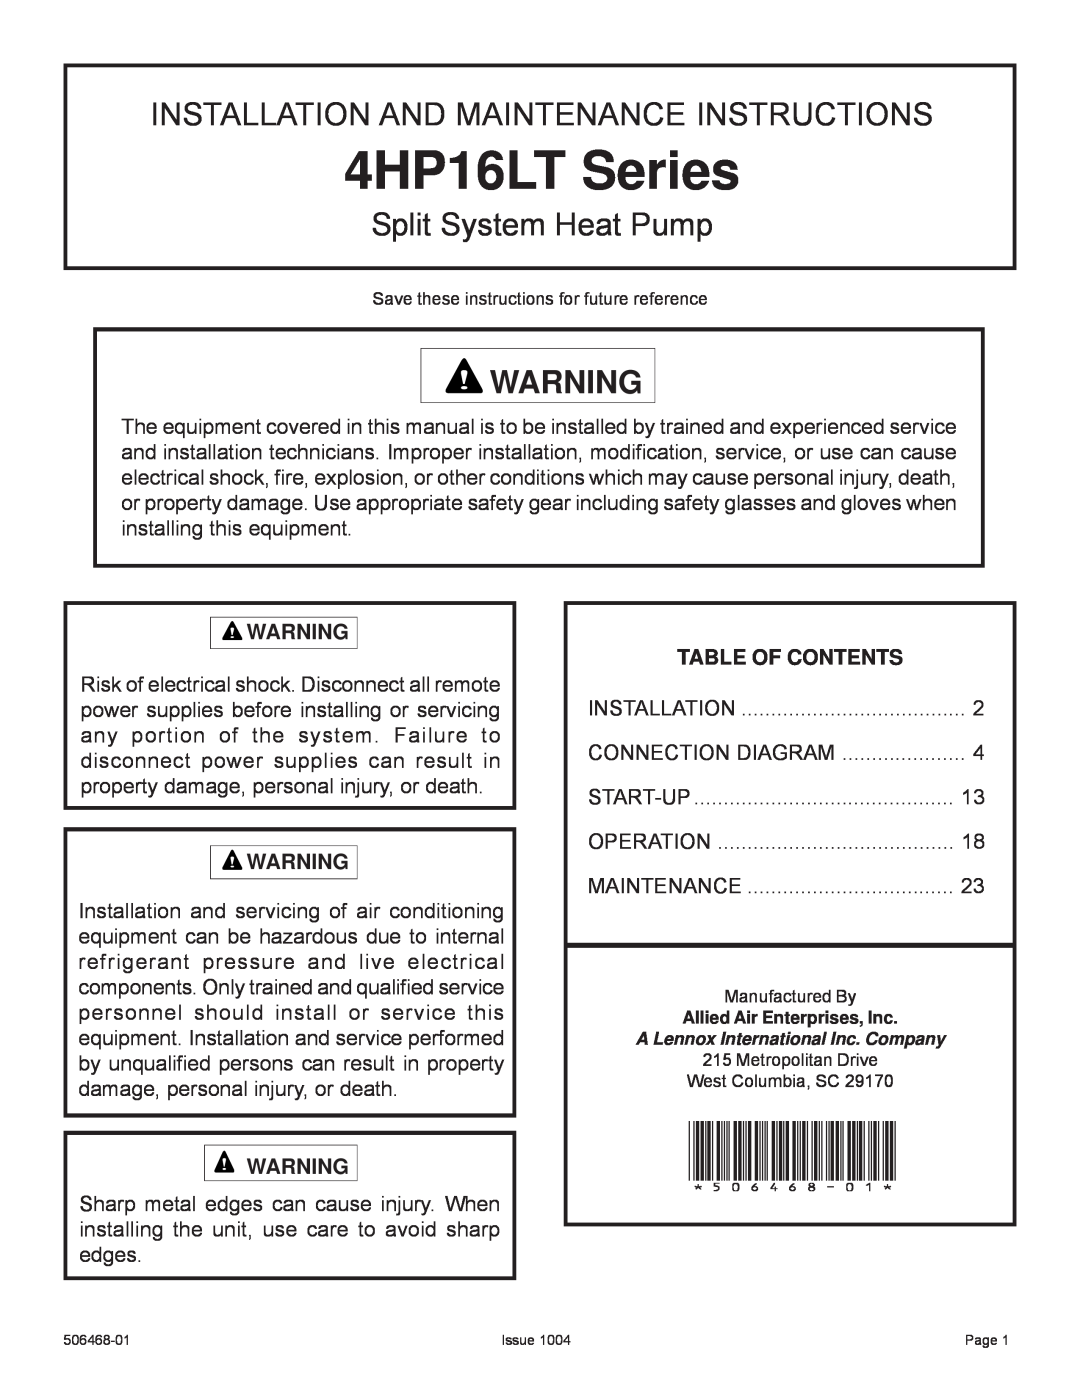 Allied Air Enterprises manual Table Of Contents, 4HP16LT Series, Installation And Maintenance Instructions 